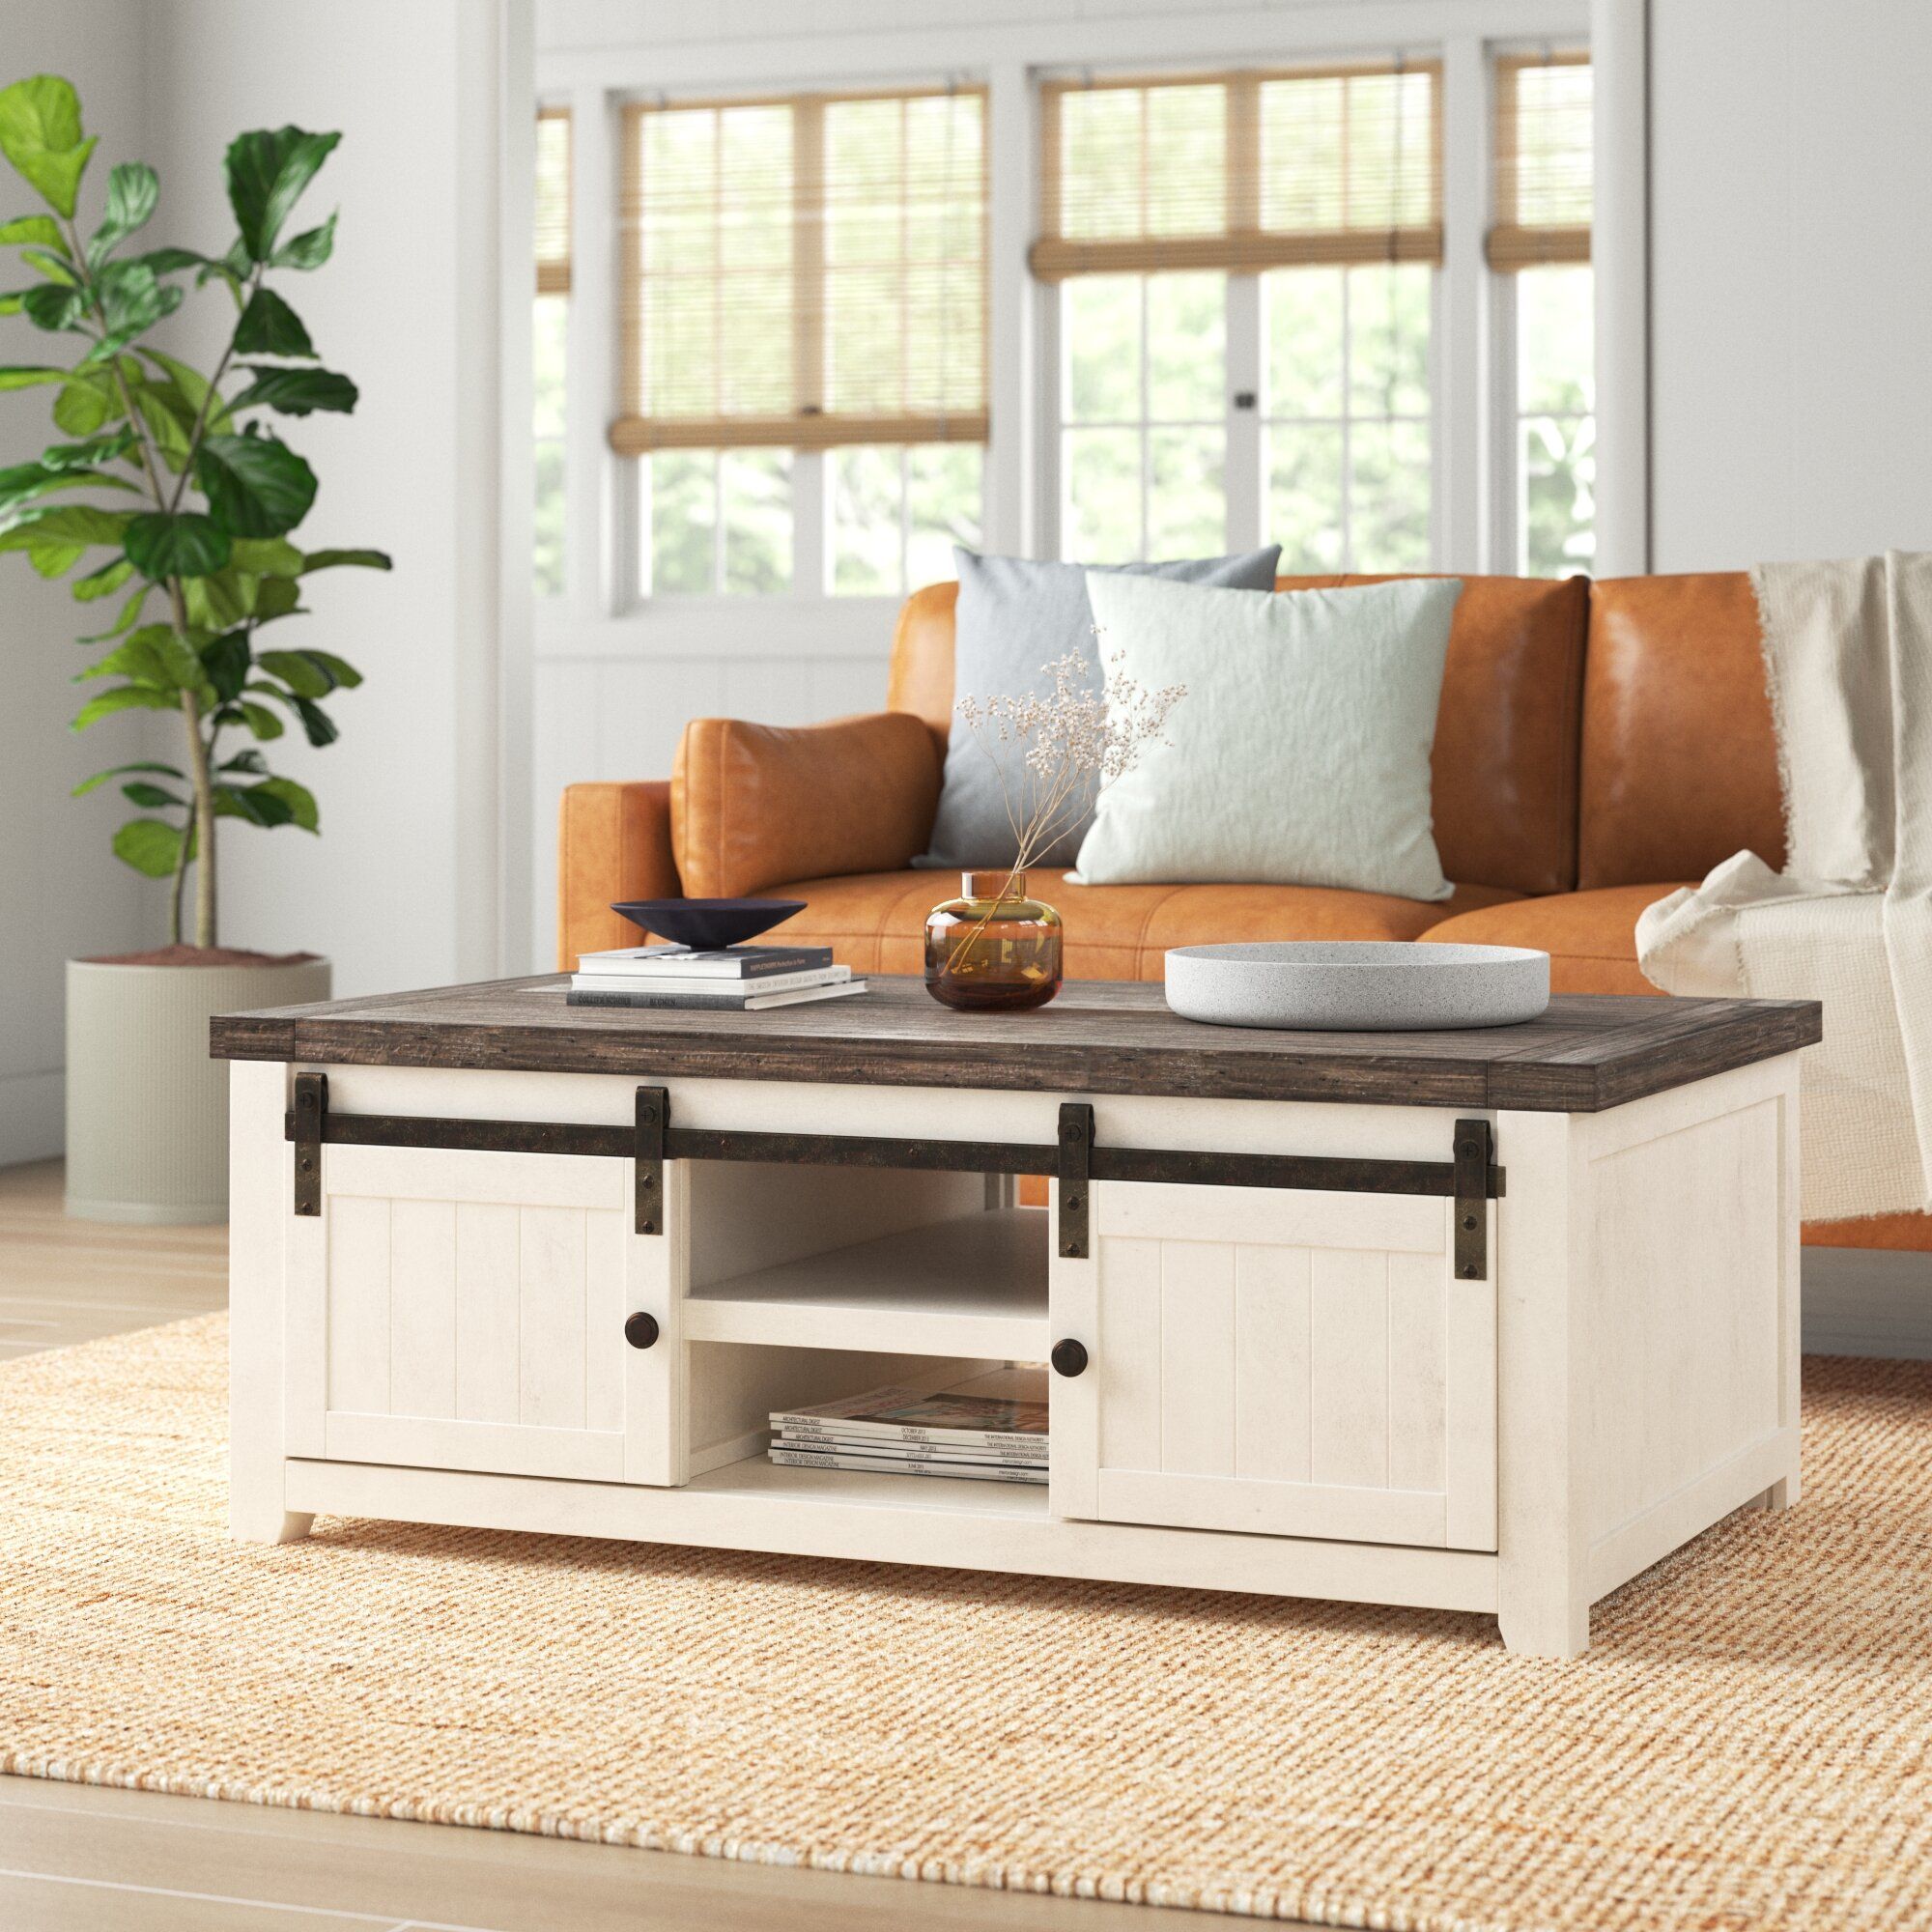 Sand & Stable Coffee Table & Reviews | Wayfair Pertaining To Coffee Tables With Storage And Barn Doors (View 4 of 15)